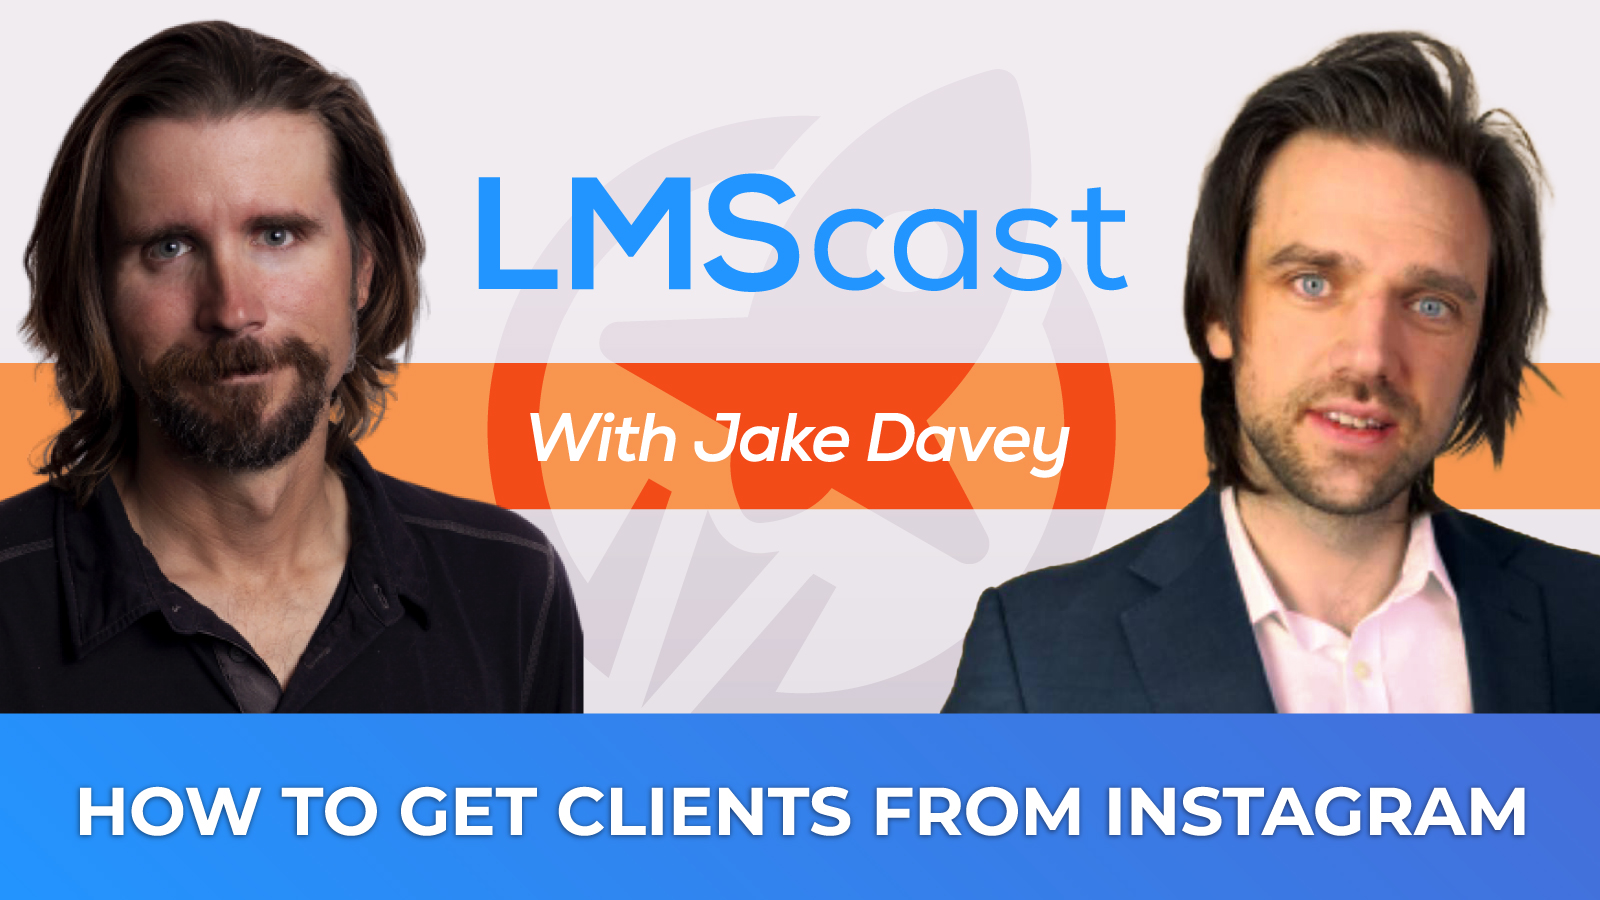 EP 408 - How to Get Clients from Instagram with Jake Davey